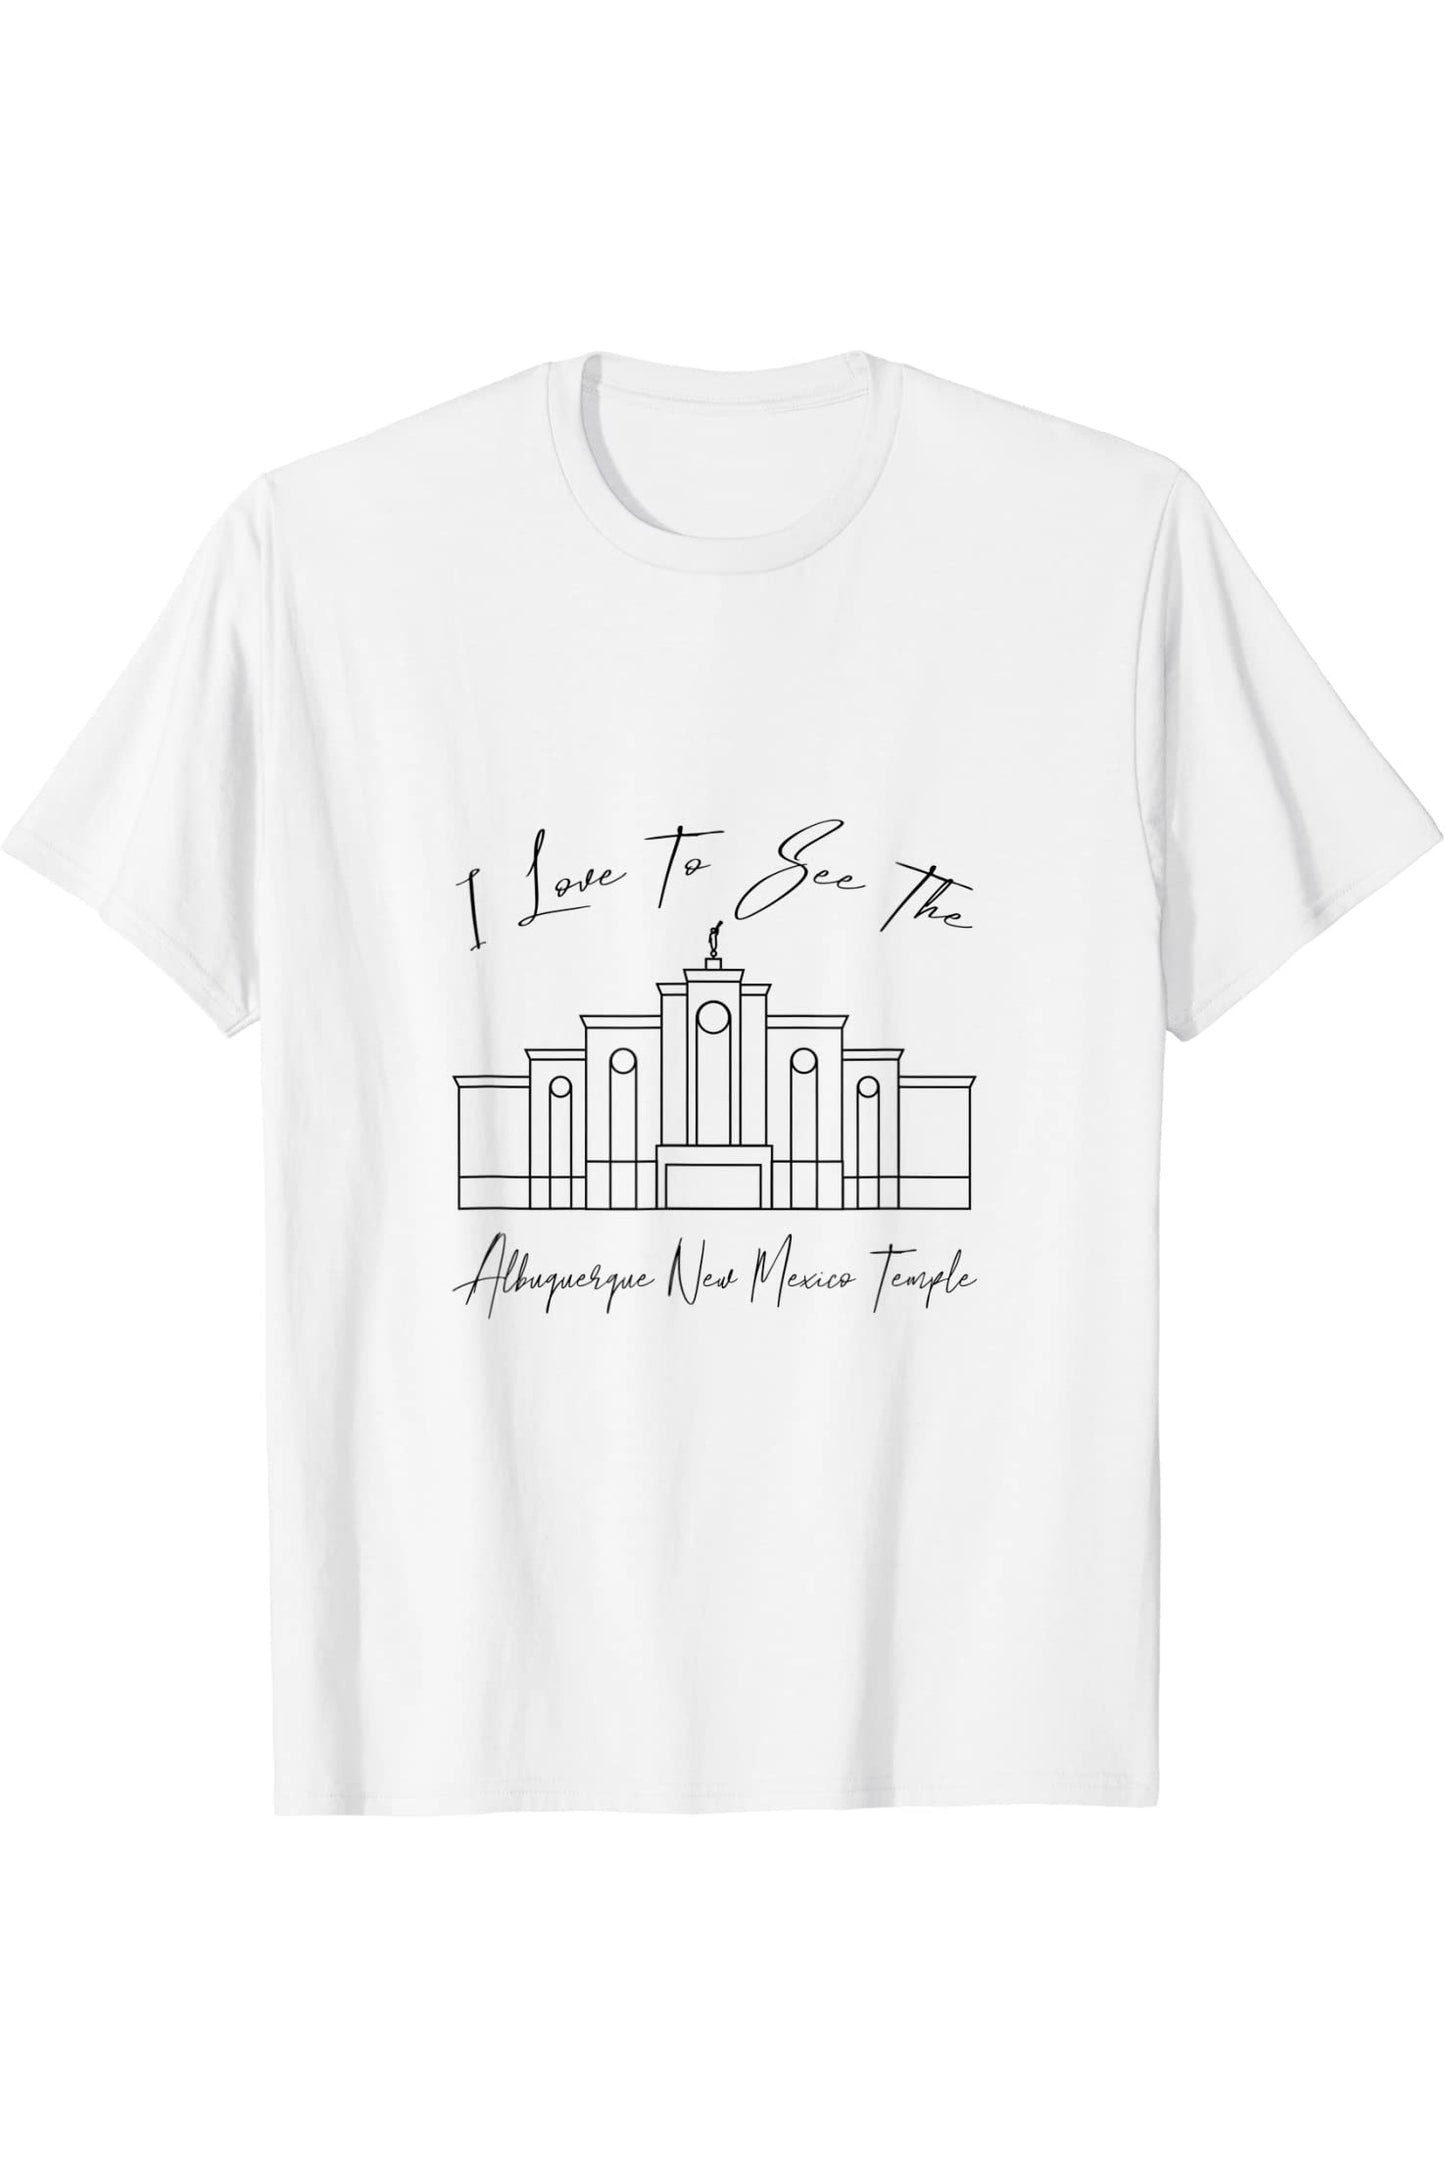 Albuquerque New Mexico Temple T-Shirt - Calligraphy Style (English) US